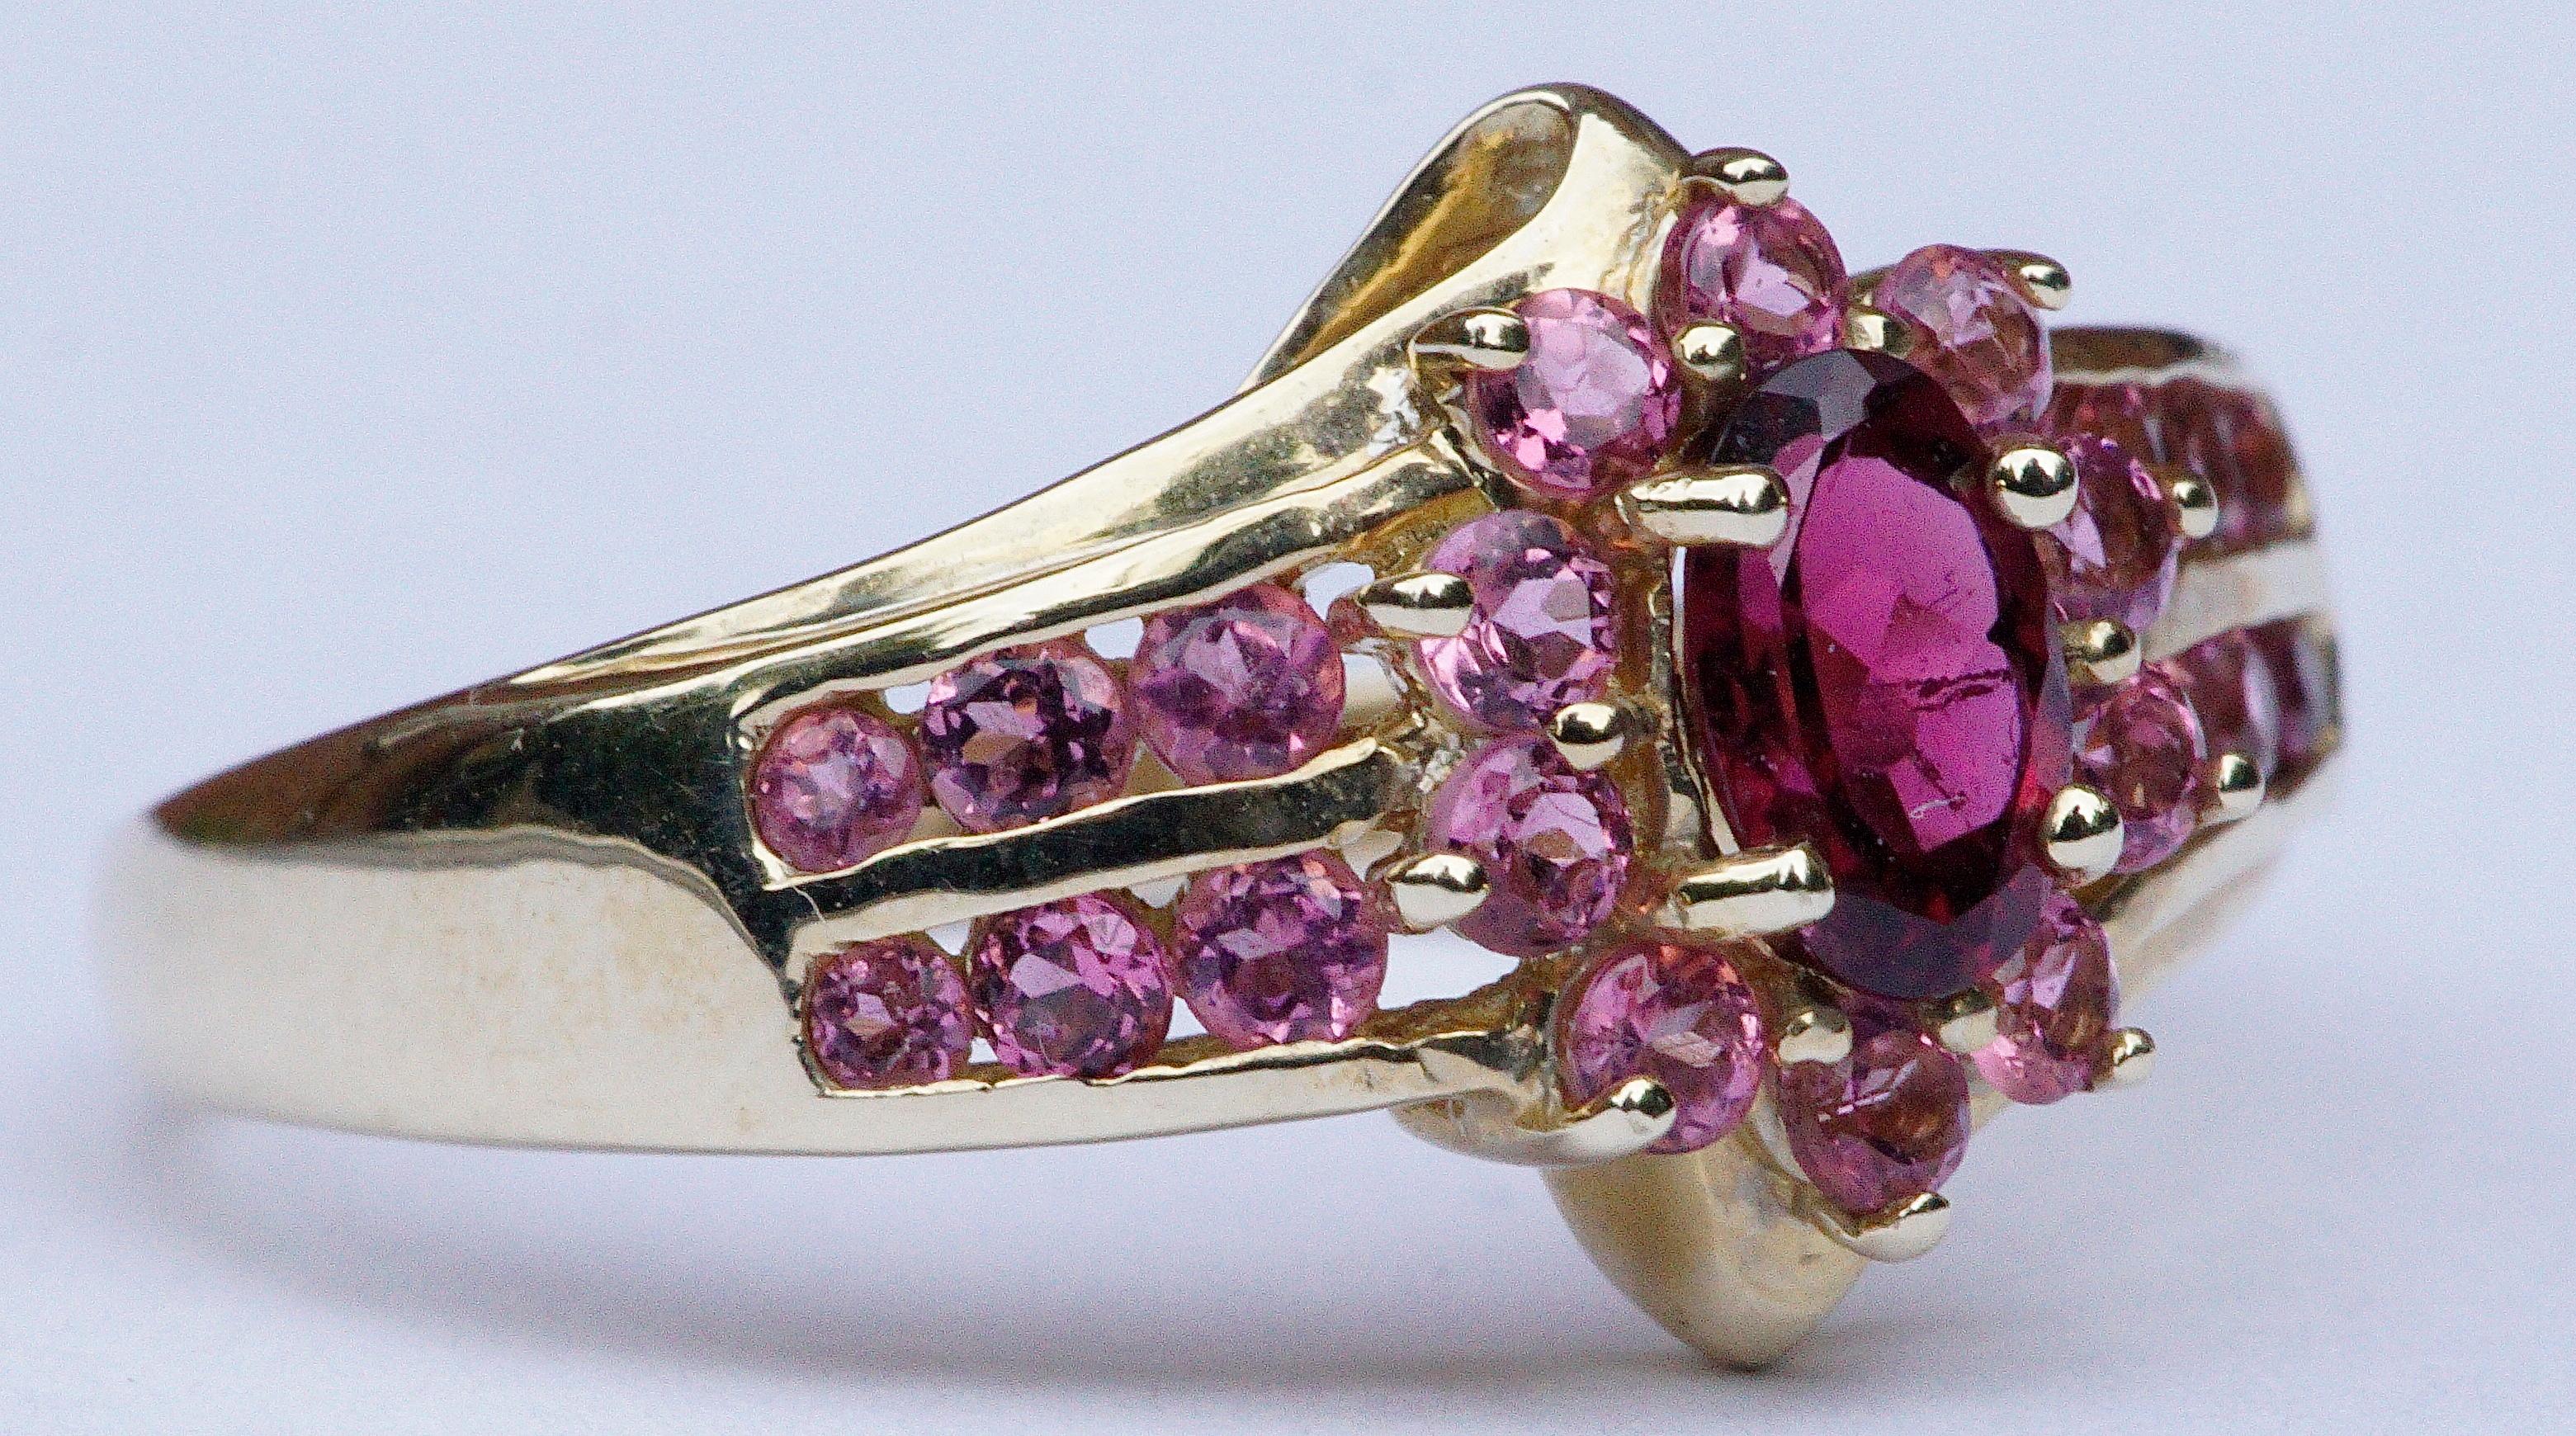 STS Jewels Inc. quality 14K gold ring, featuring a faceted deep pink natural tourmaline, and twenty two light pink gemstones. Twelve of the faceted light pink stones are channel set, six to each side, and ten are in a cluster around the tourmaline.